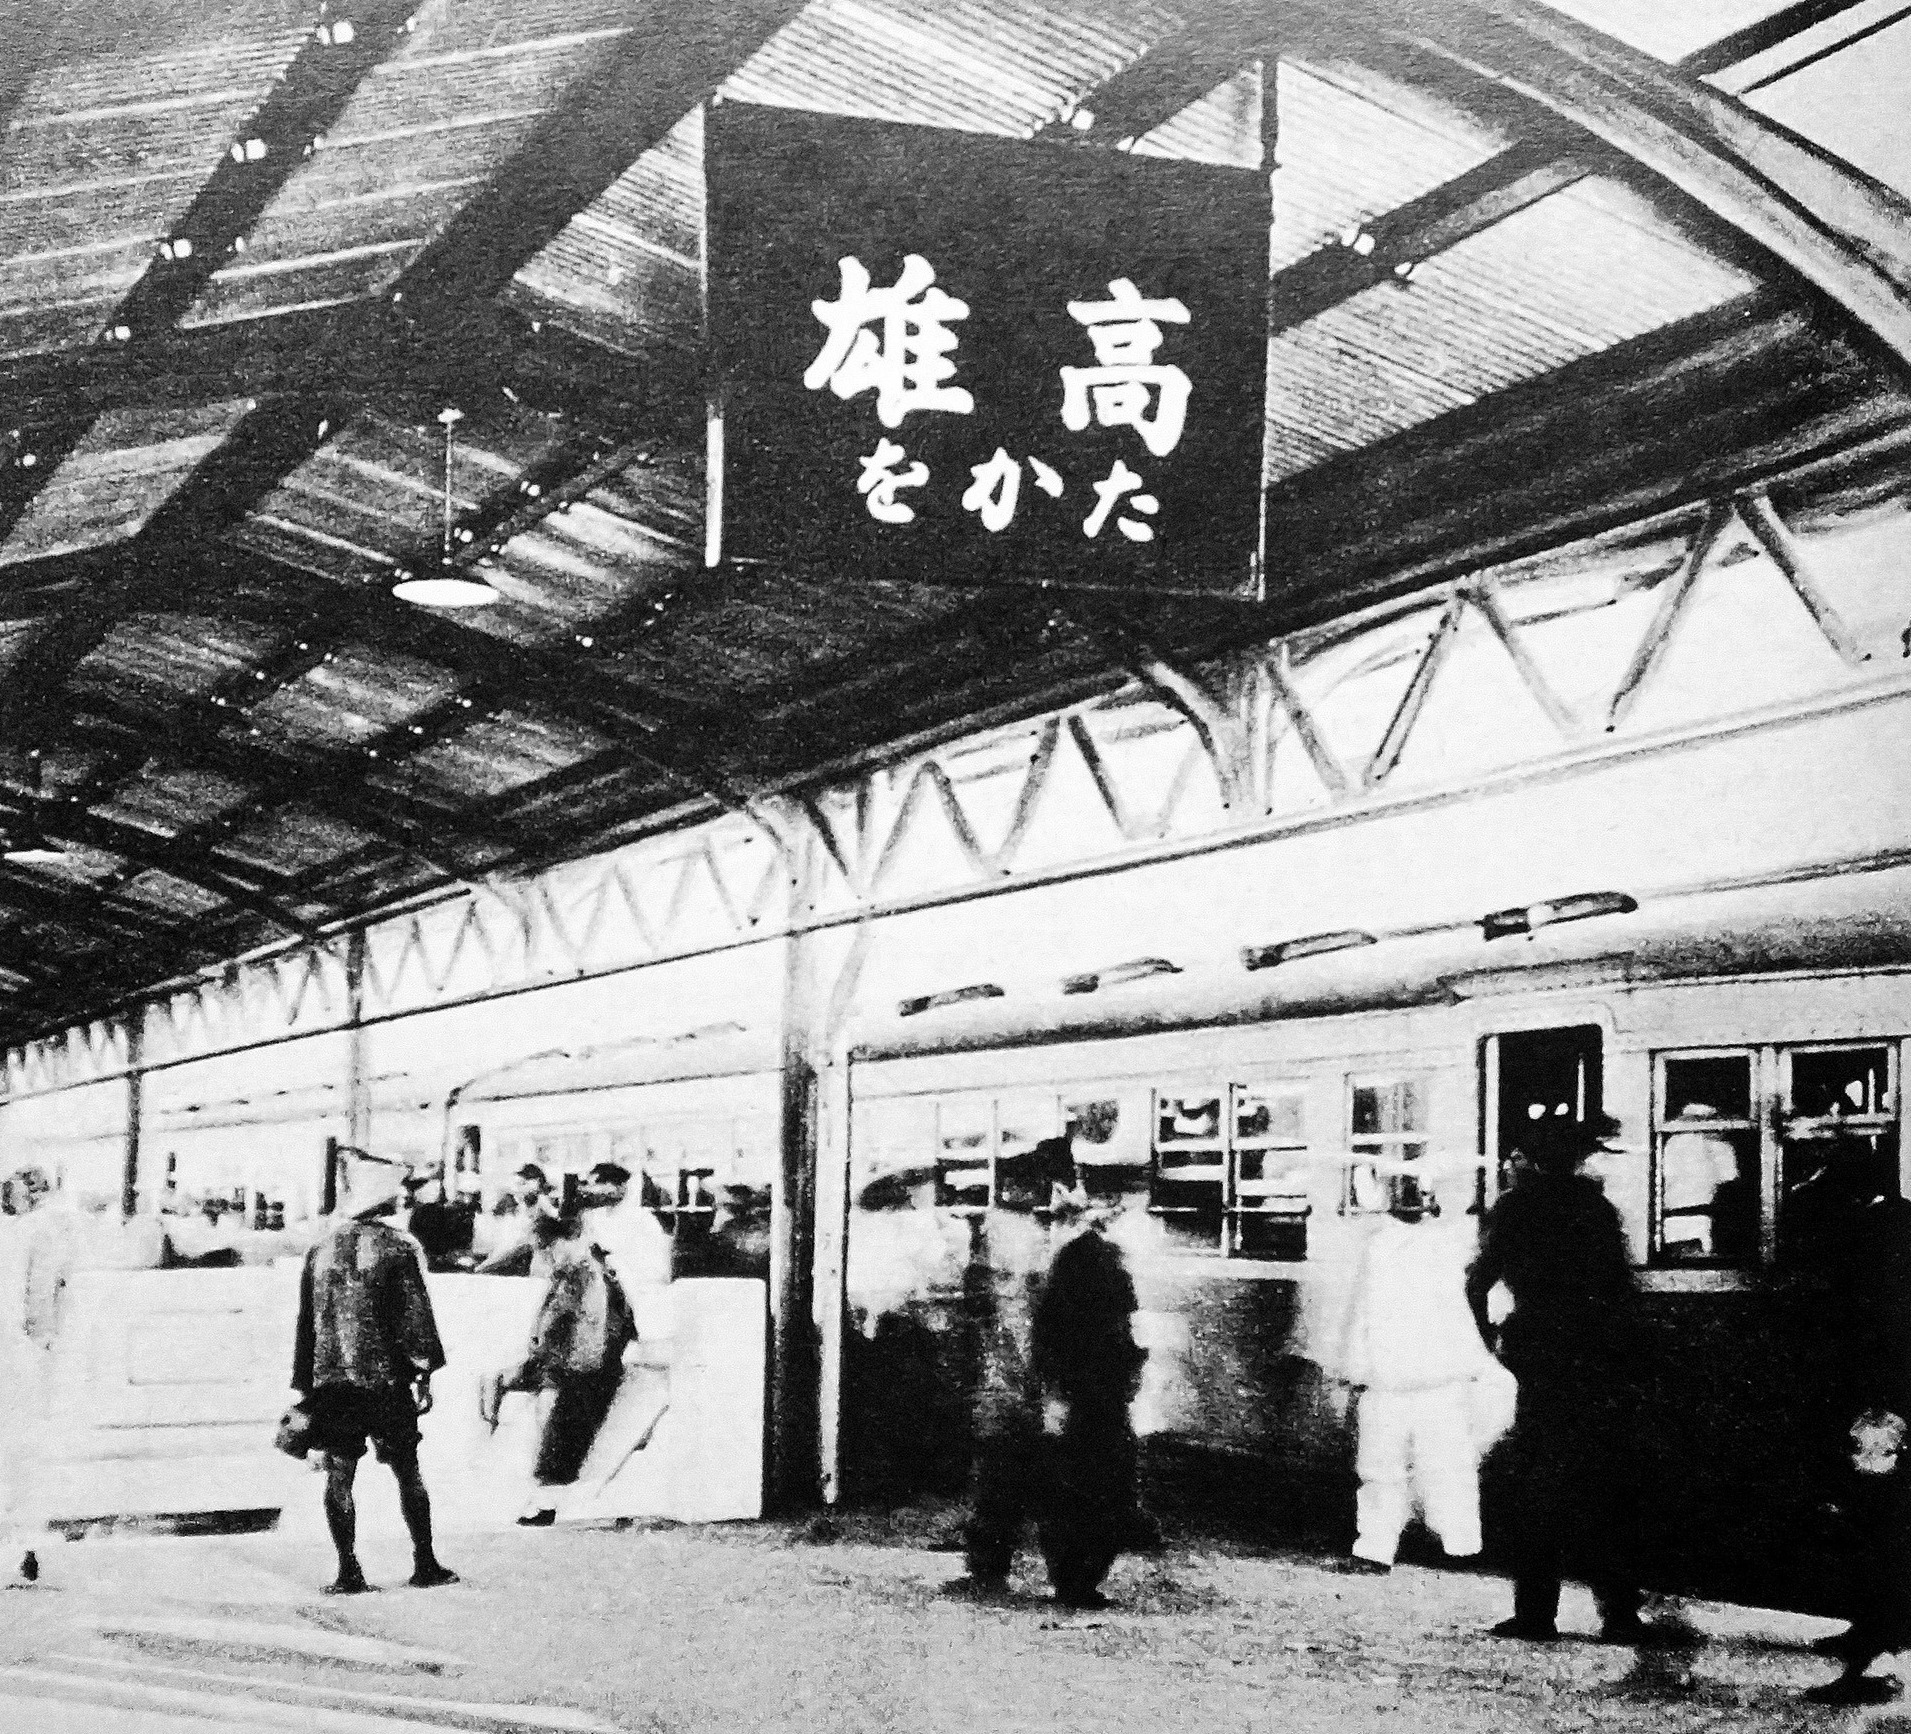 The main train station at Takao (now Kaohsiung), Taiwan, 28 Apr 1941